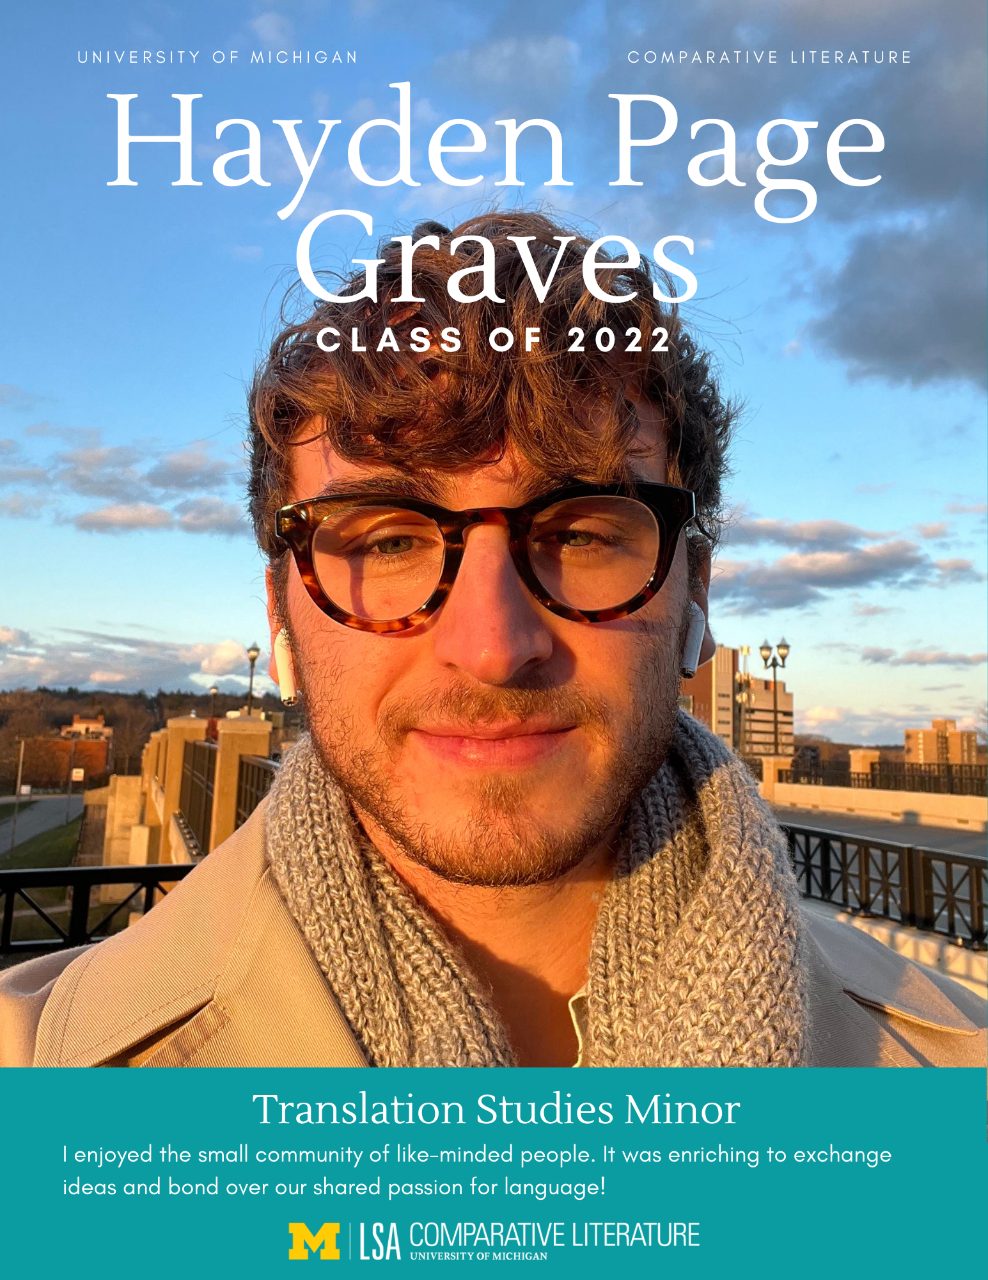 Headshot of Hayden Page Graves with text, “University of Michigan, Comparative Literature, Hayden Page Graves Class of 2022. Translation Studies Minor: I really enjoyed the small community of like-minded people. It was enriching to exchange ideas and bond over our shared passion for language!”